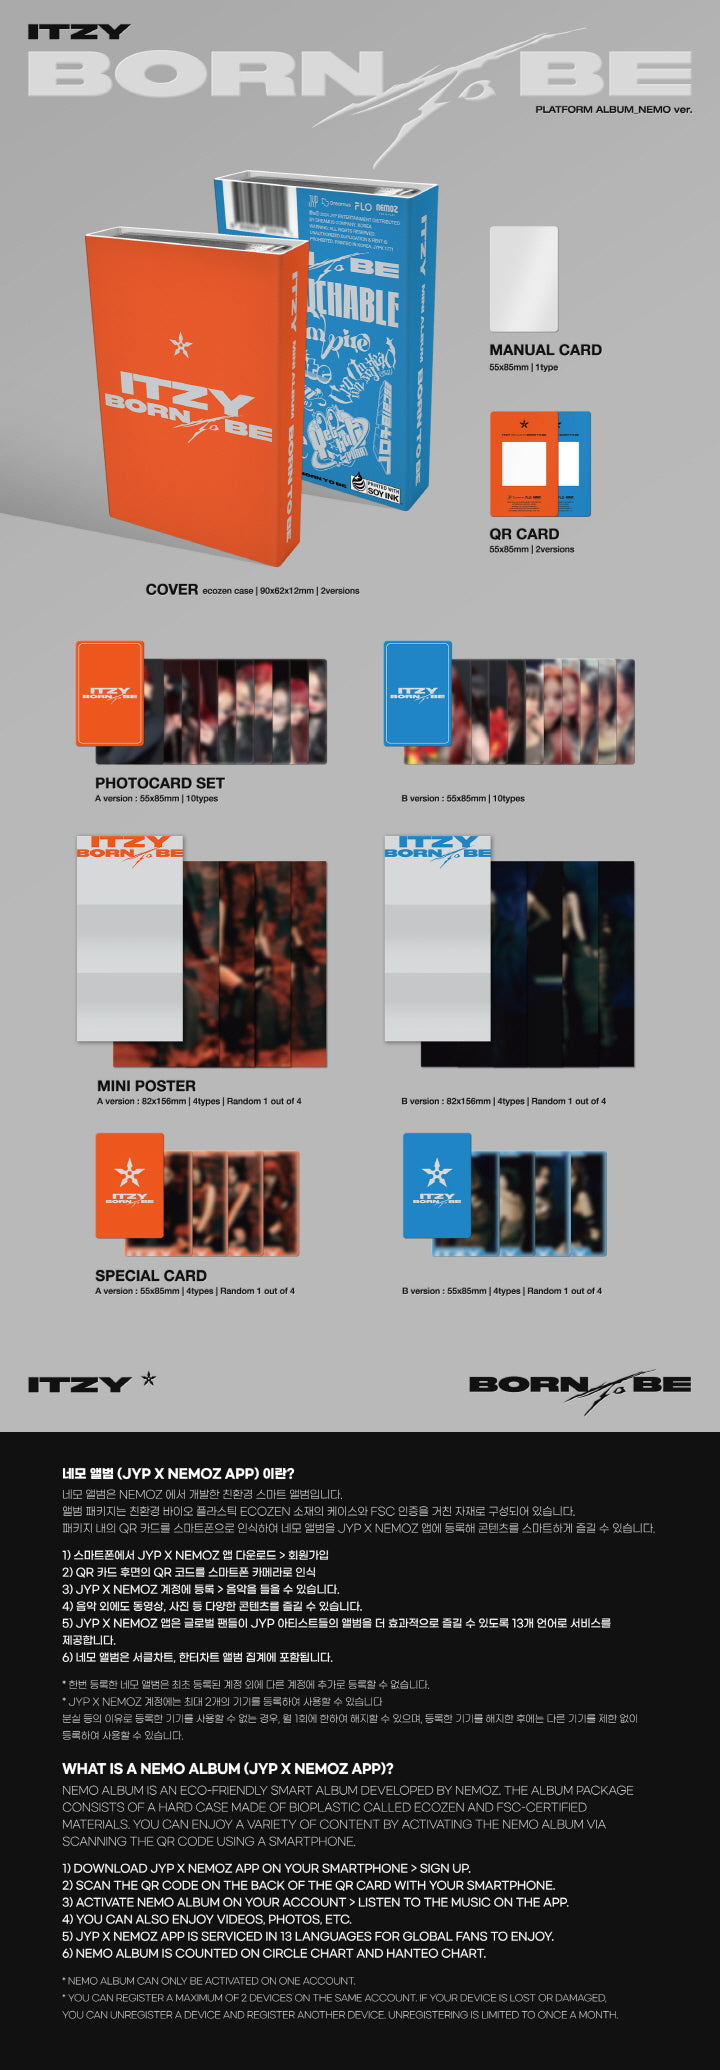 1 QR Card
10 Photo Cards
1 Mini Poster (random out of 4 types)
1 Special Card (random out of 4 types)